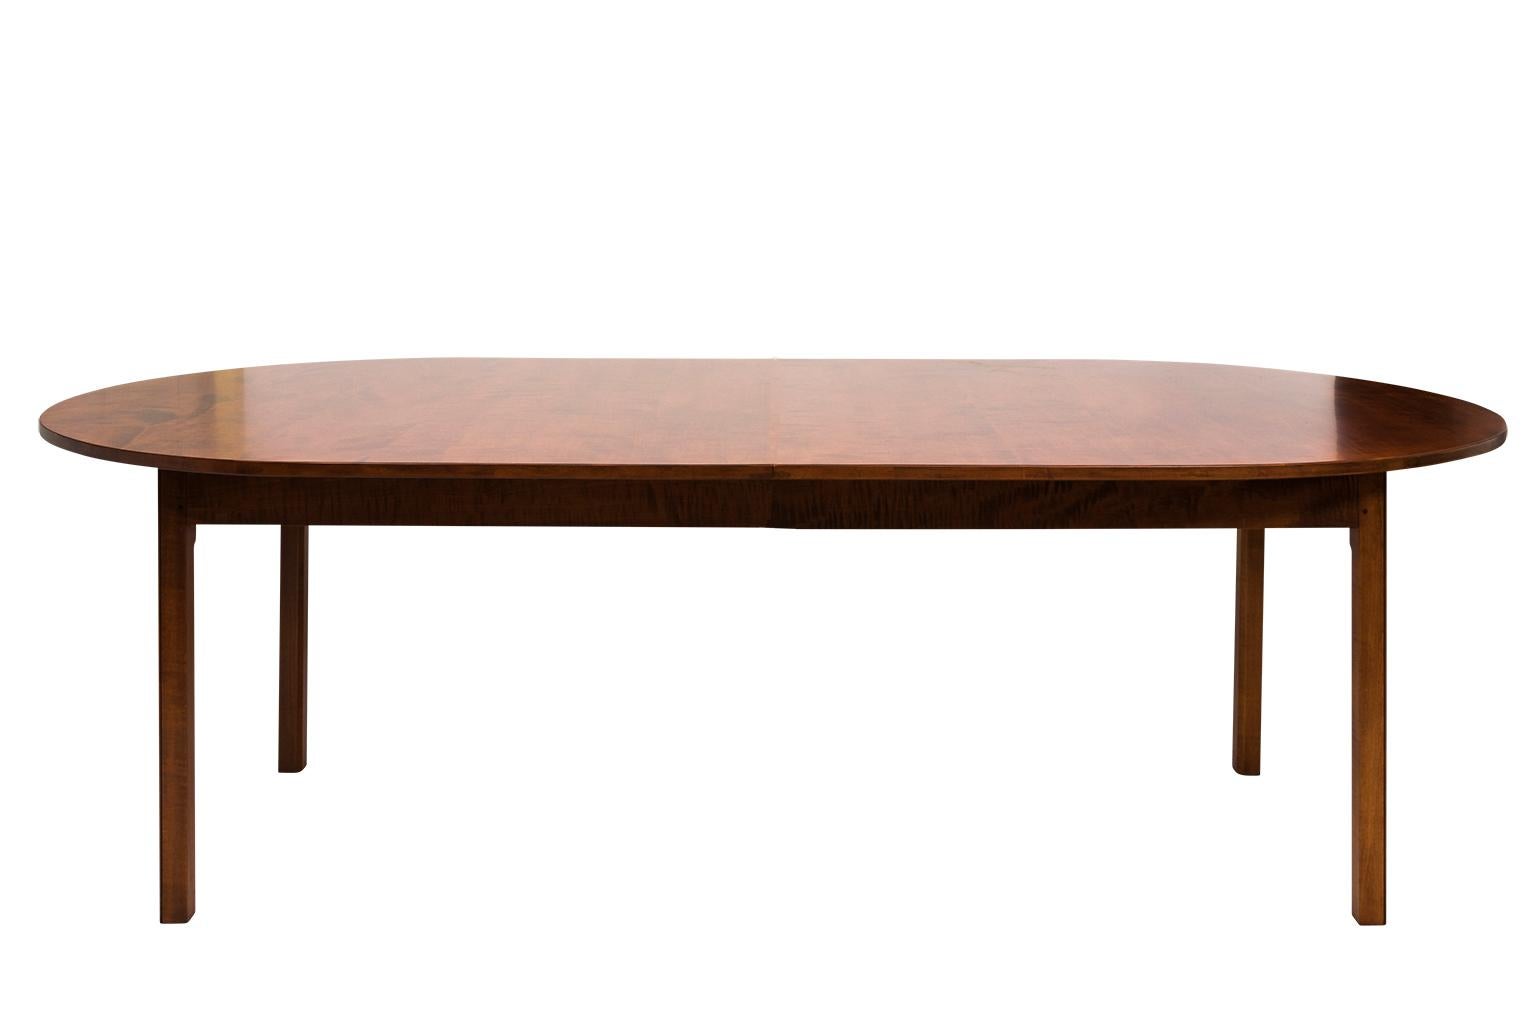 Contemporary Danish style Tiger Maple dining room table by David LeFort, circa 2000. Table consists of three leaves that measure 14.75 inches each.
 